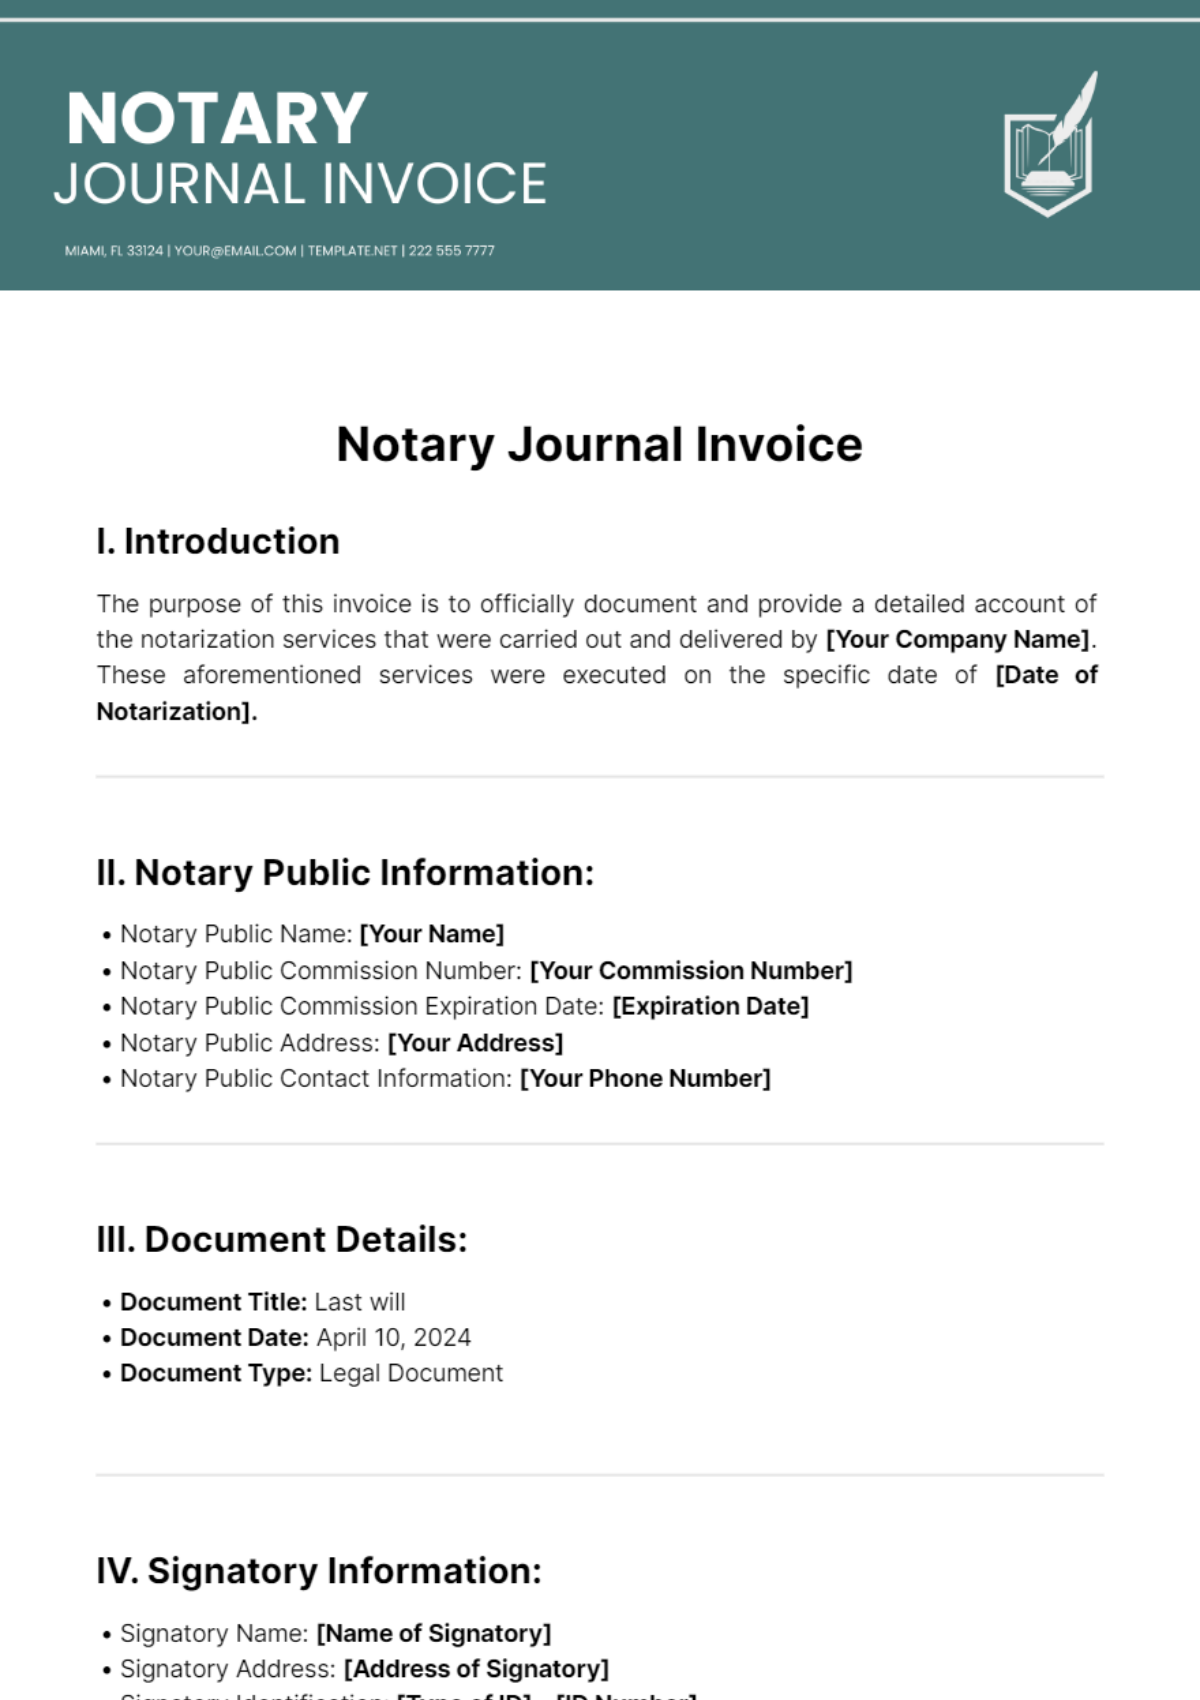 Free Notary Journal Invoice Template